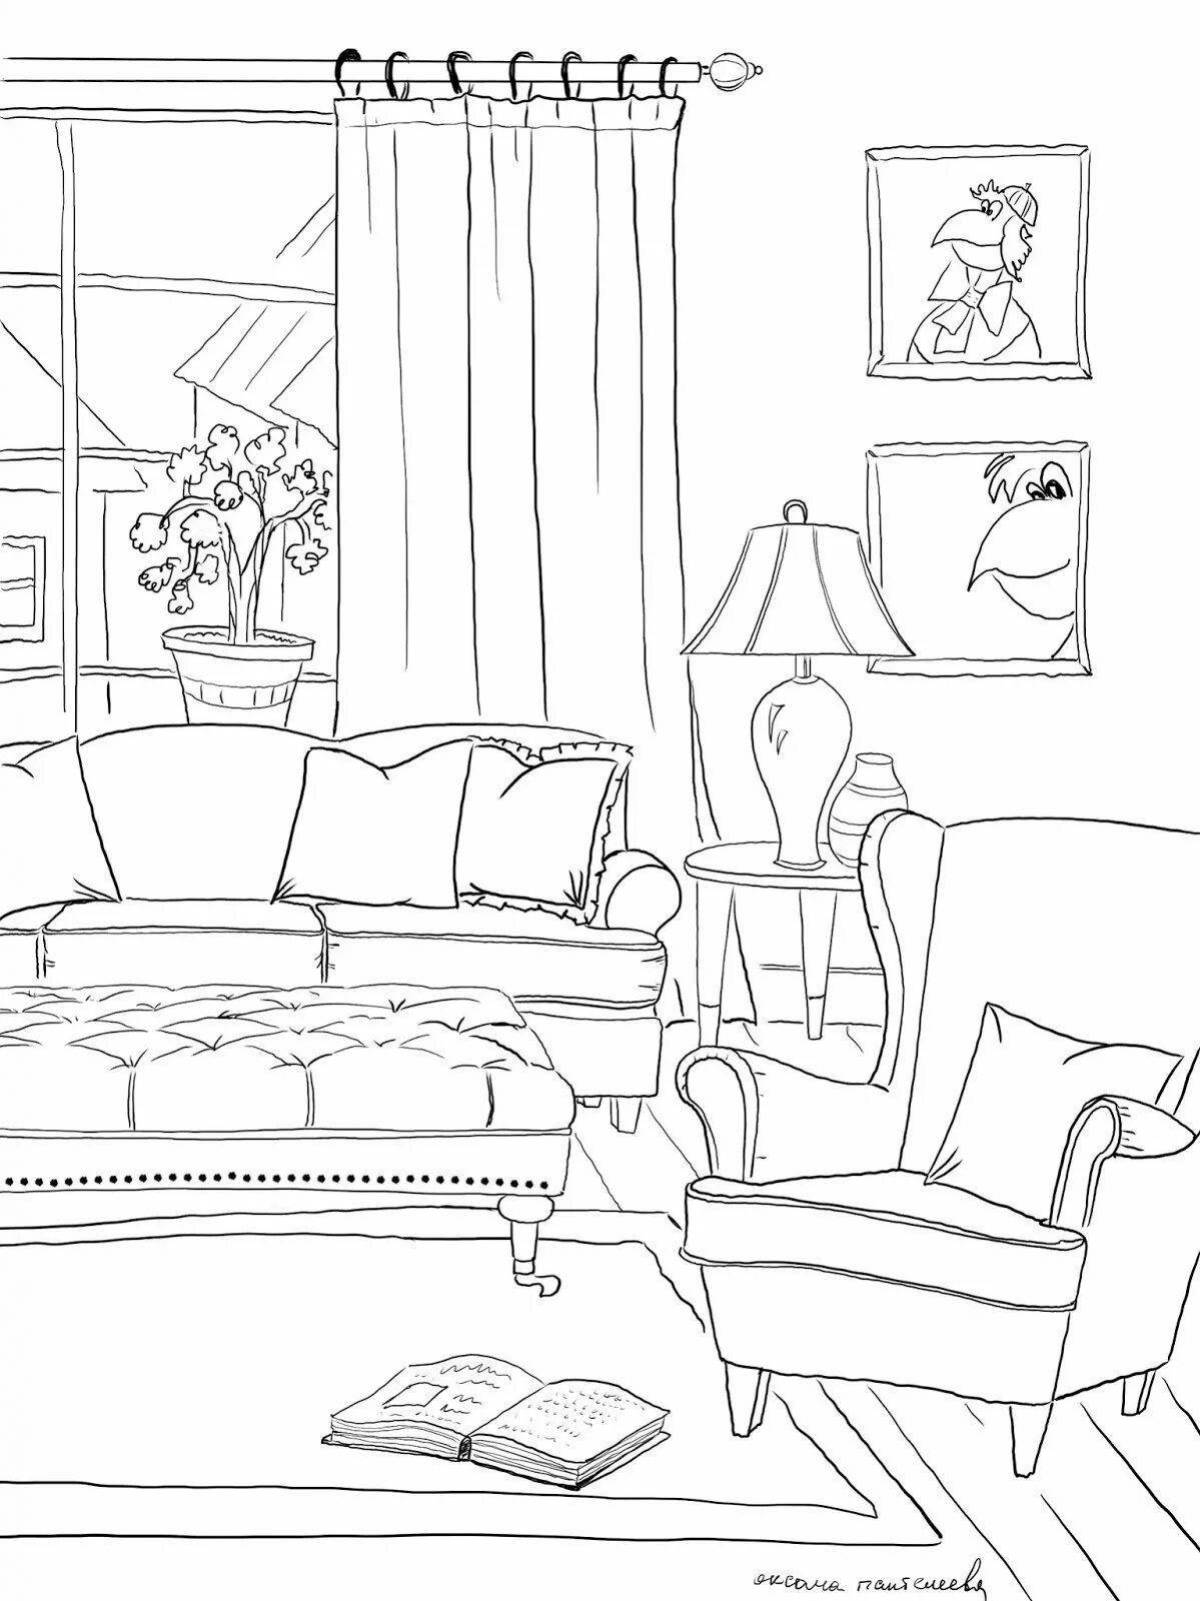 Playful living room coloring book for kids